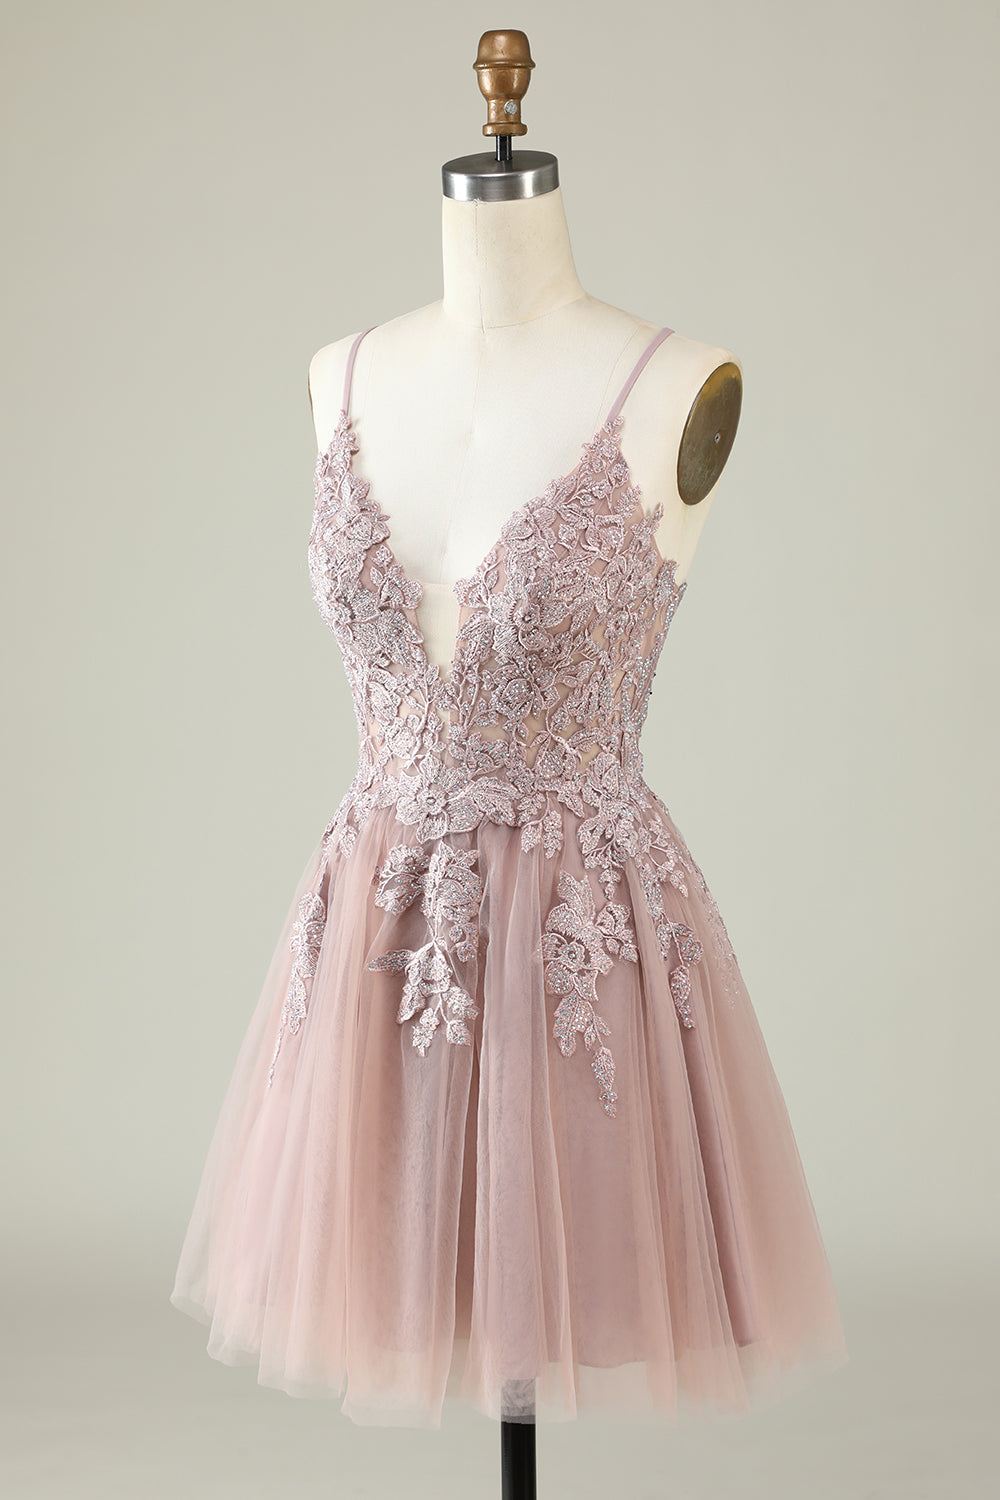 Spaghetti Straps Blush Short Tulle Homecoming Dress with Appliques